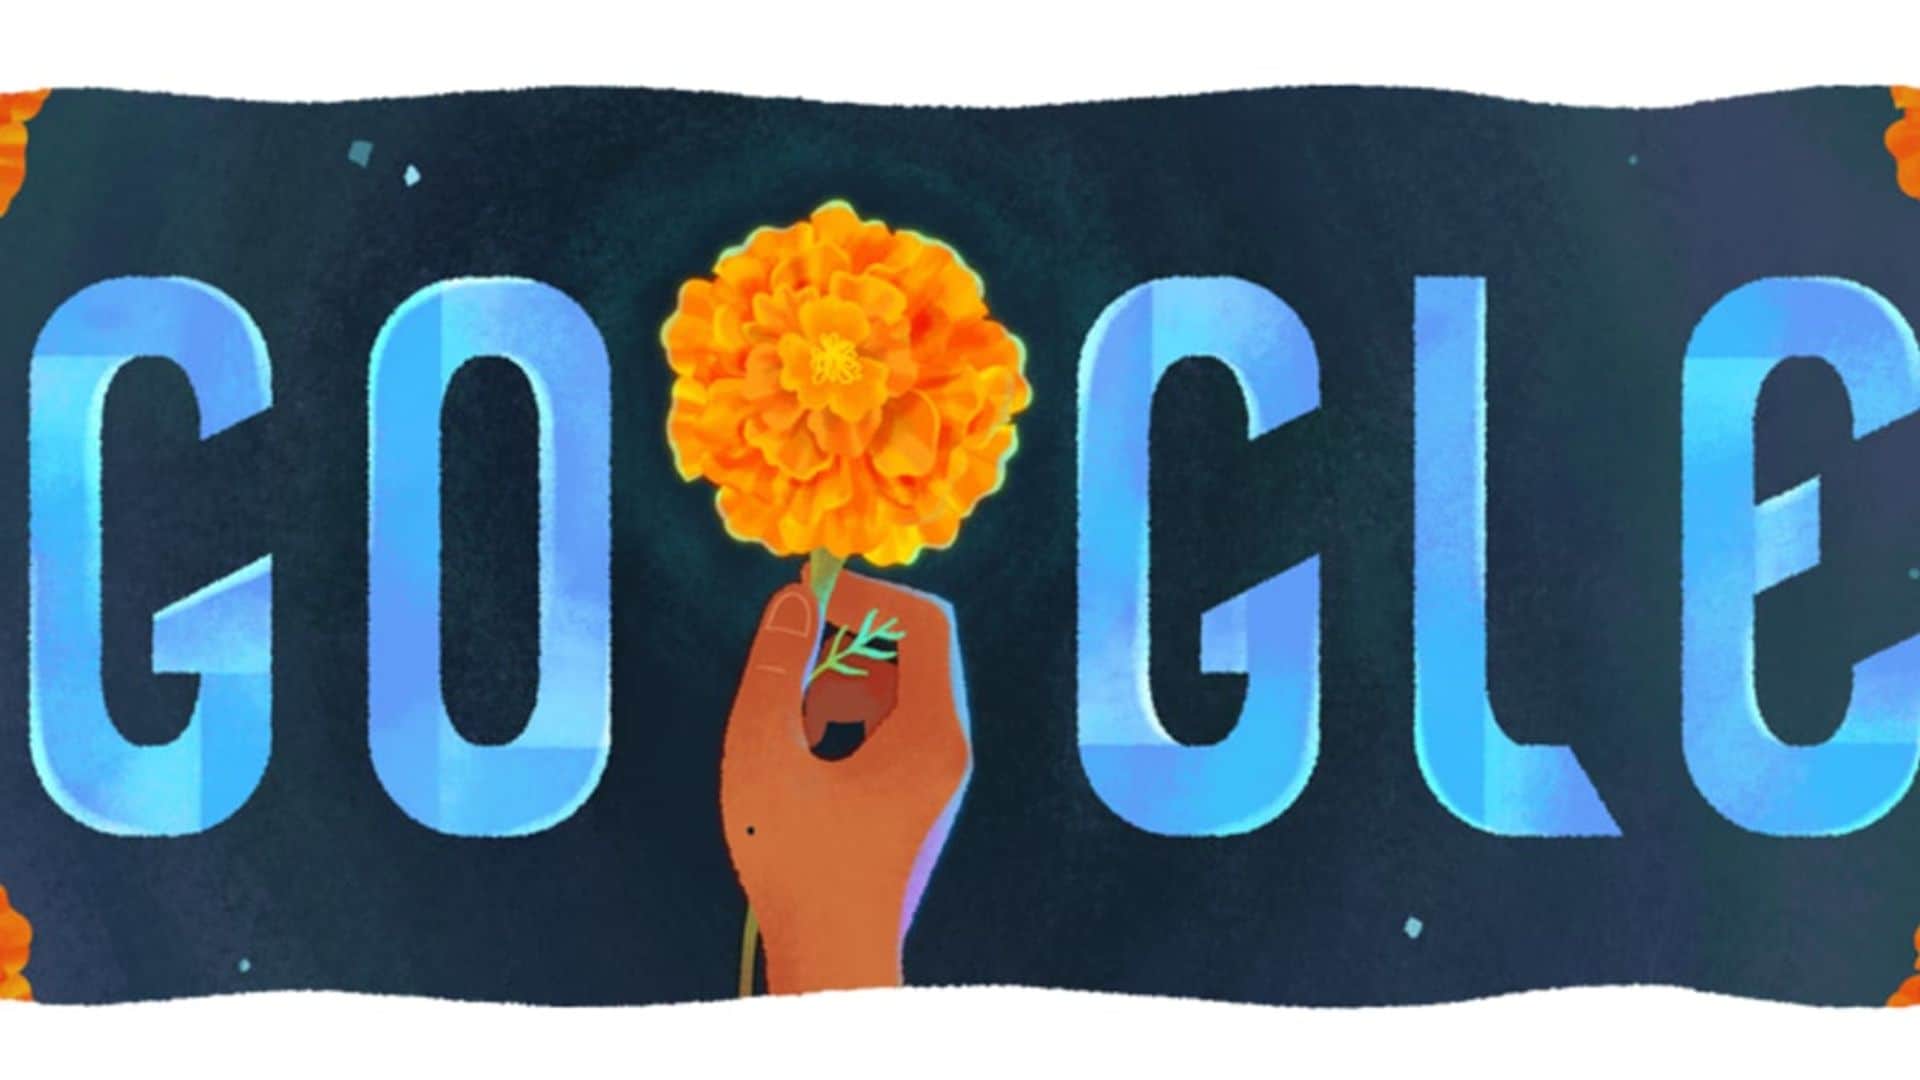 Google Doodle honors annual Día de Muertos with Mexican marigolds illustration